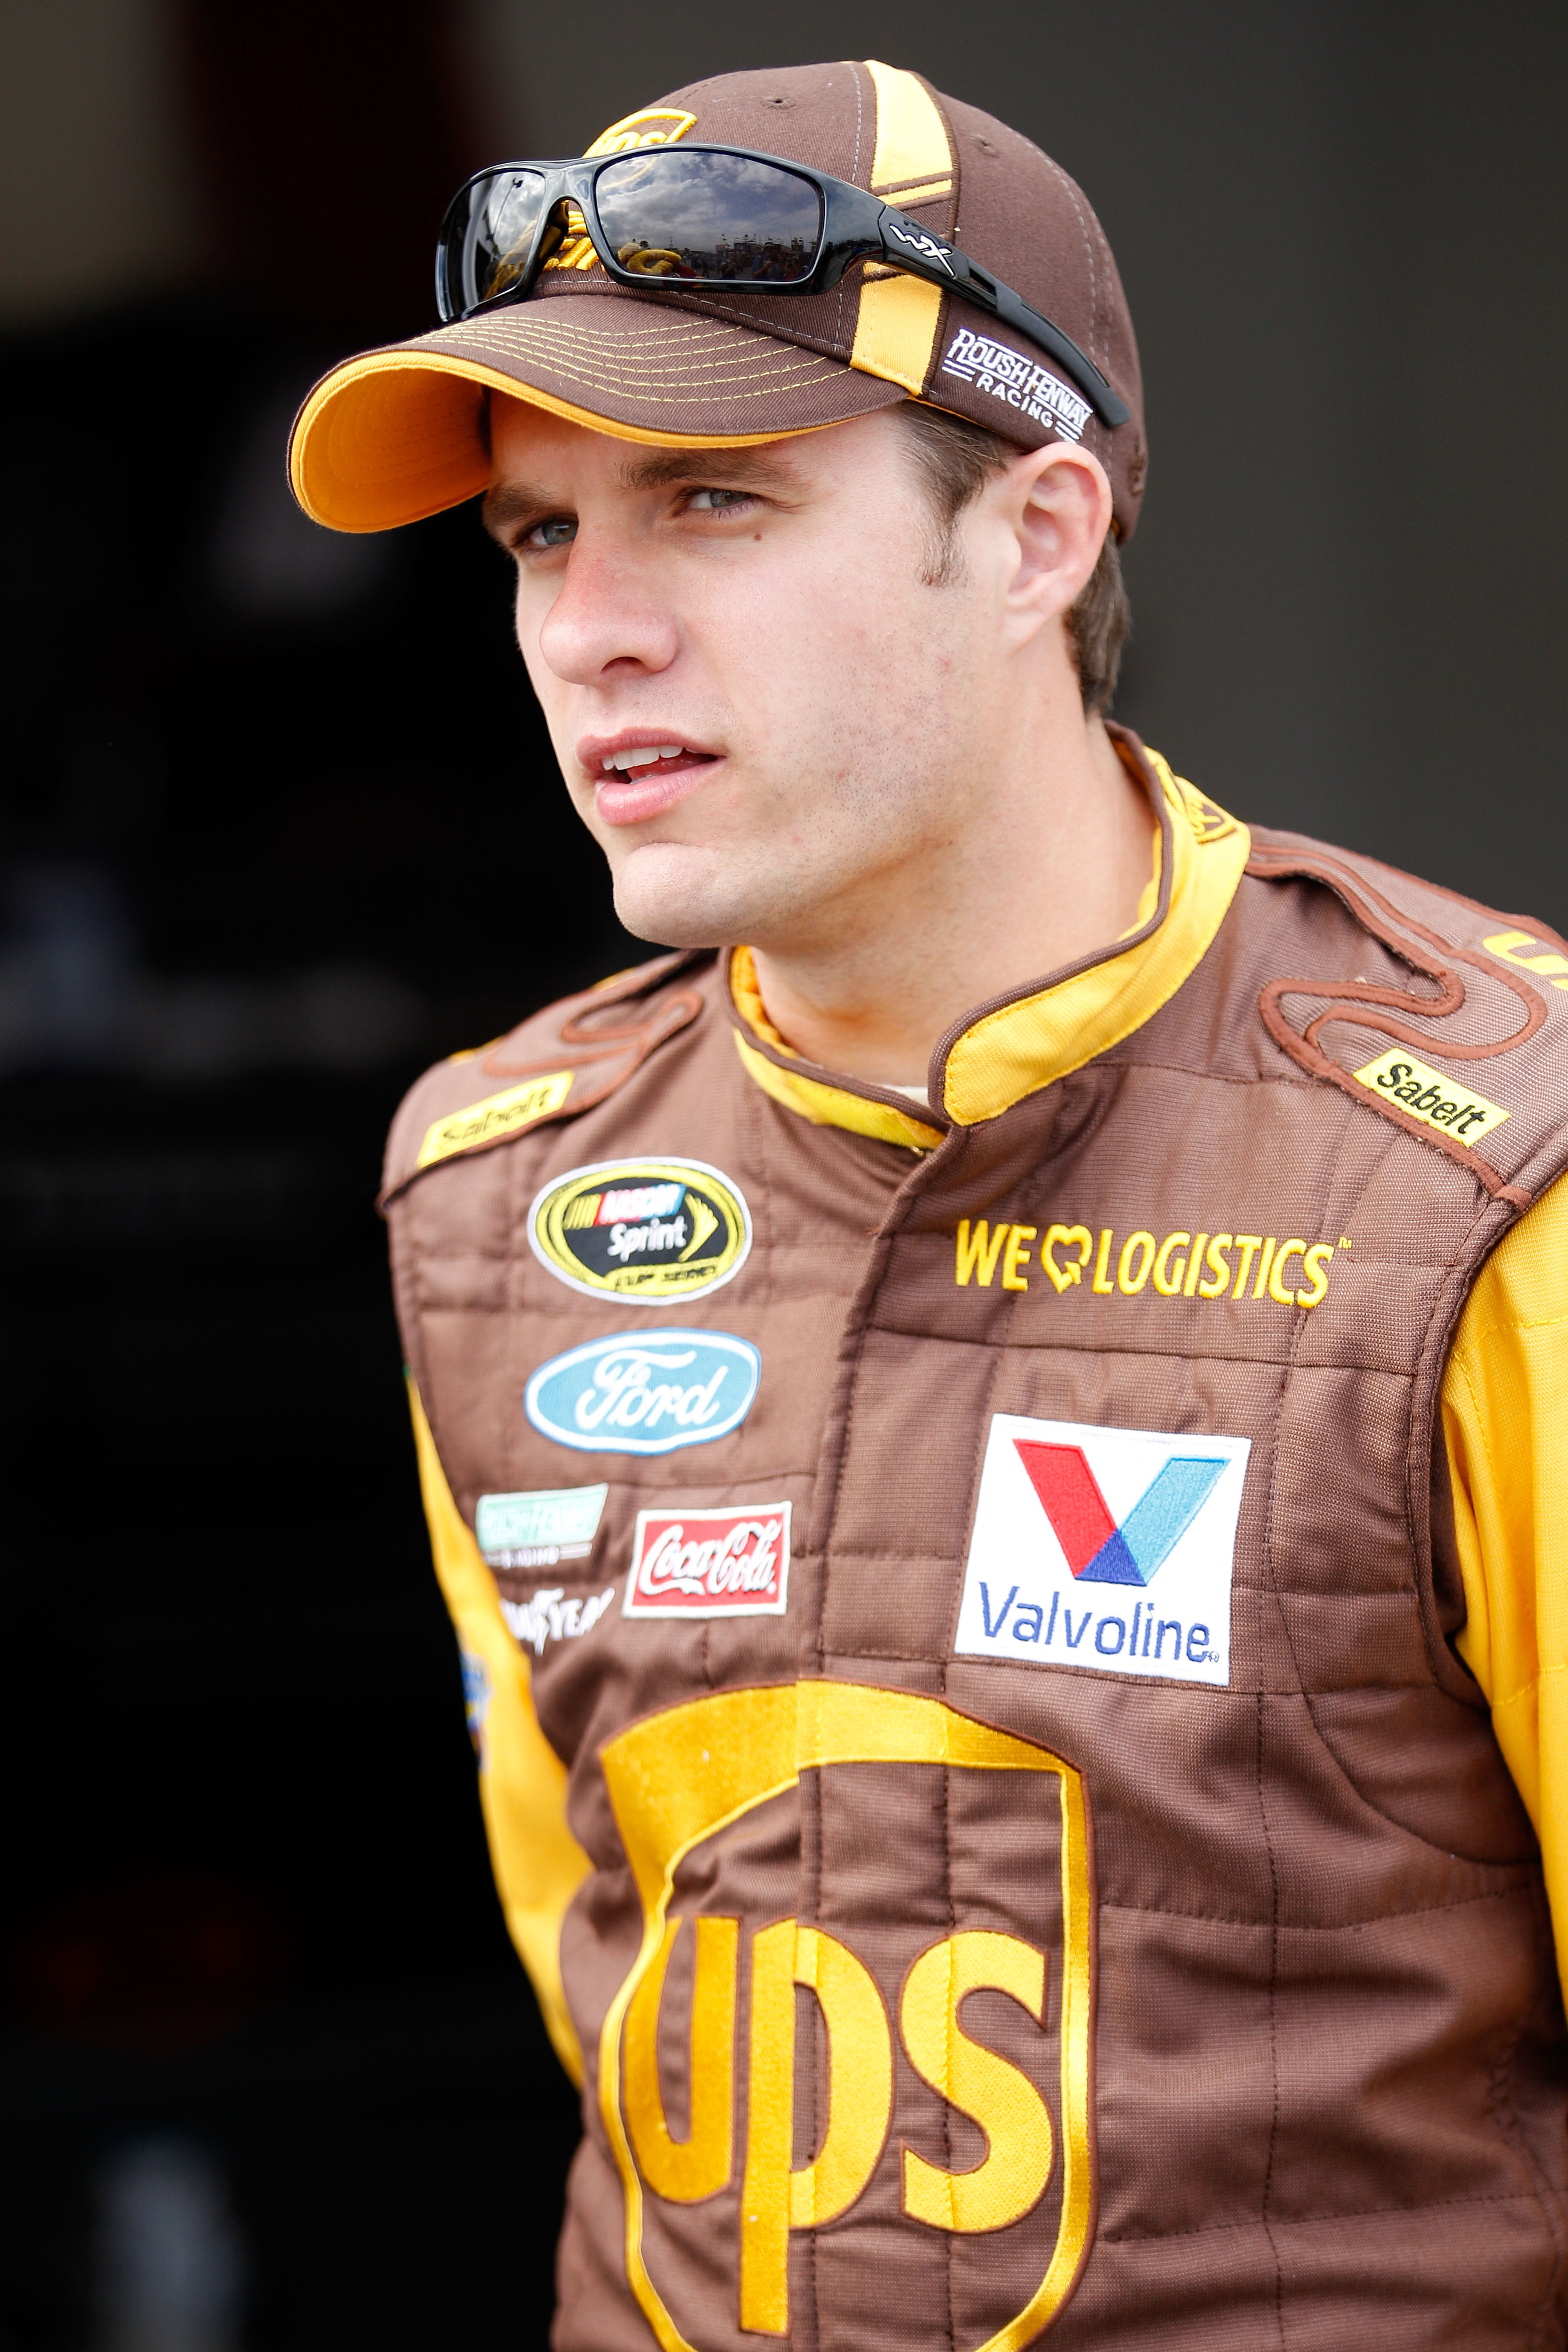 DAYTONA BEACH, FL - FEBRUARY 16:  David Ragan, driver of the #6 UPS Ford, looks on in the garage area during practice for the NASCAR Sprint Cup Series Daytona 500 at Daytona International Speedway on February 16, 2011 in Daytona Beach, Florida.  (Photo by